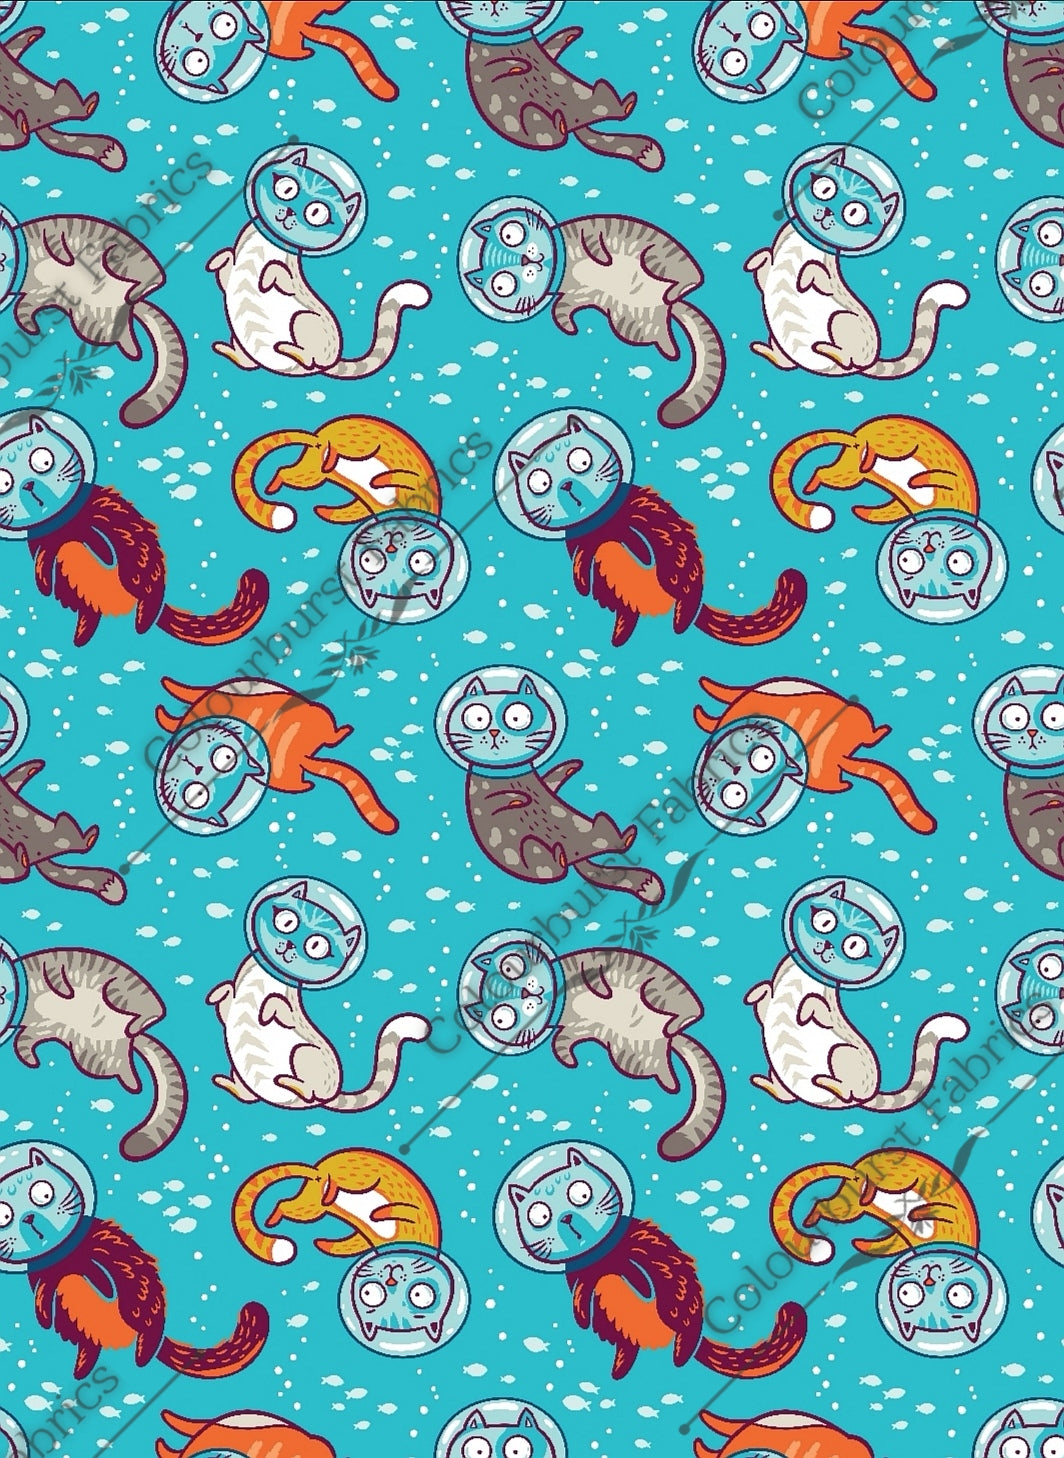 Underwater swimming cats with fish bowls on their heads. Little fish swim around them. Seamless design for custom fabric printing onto our 22 bases.